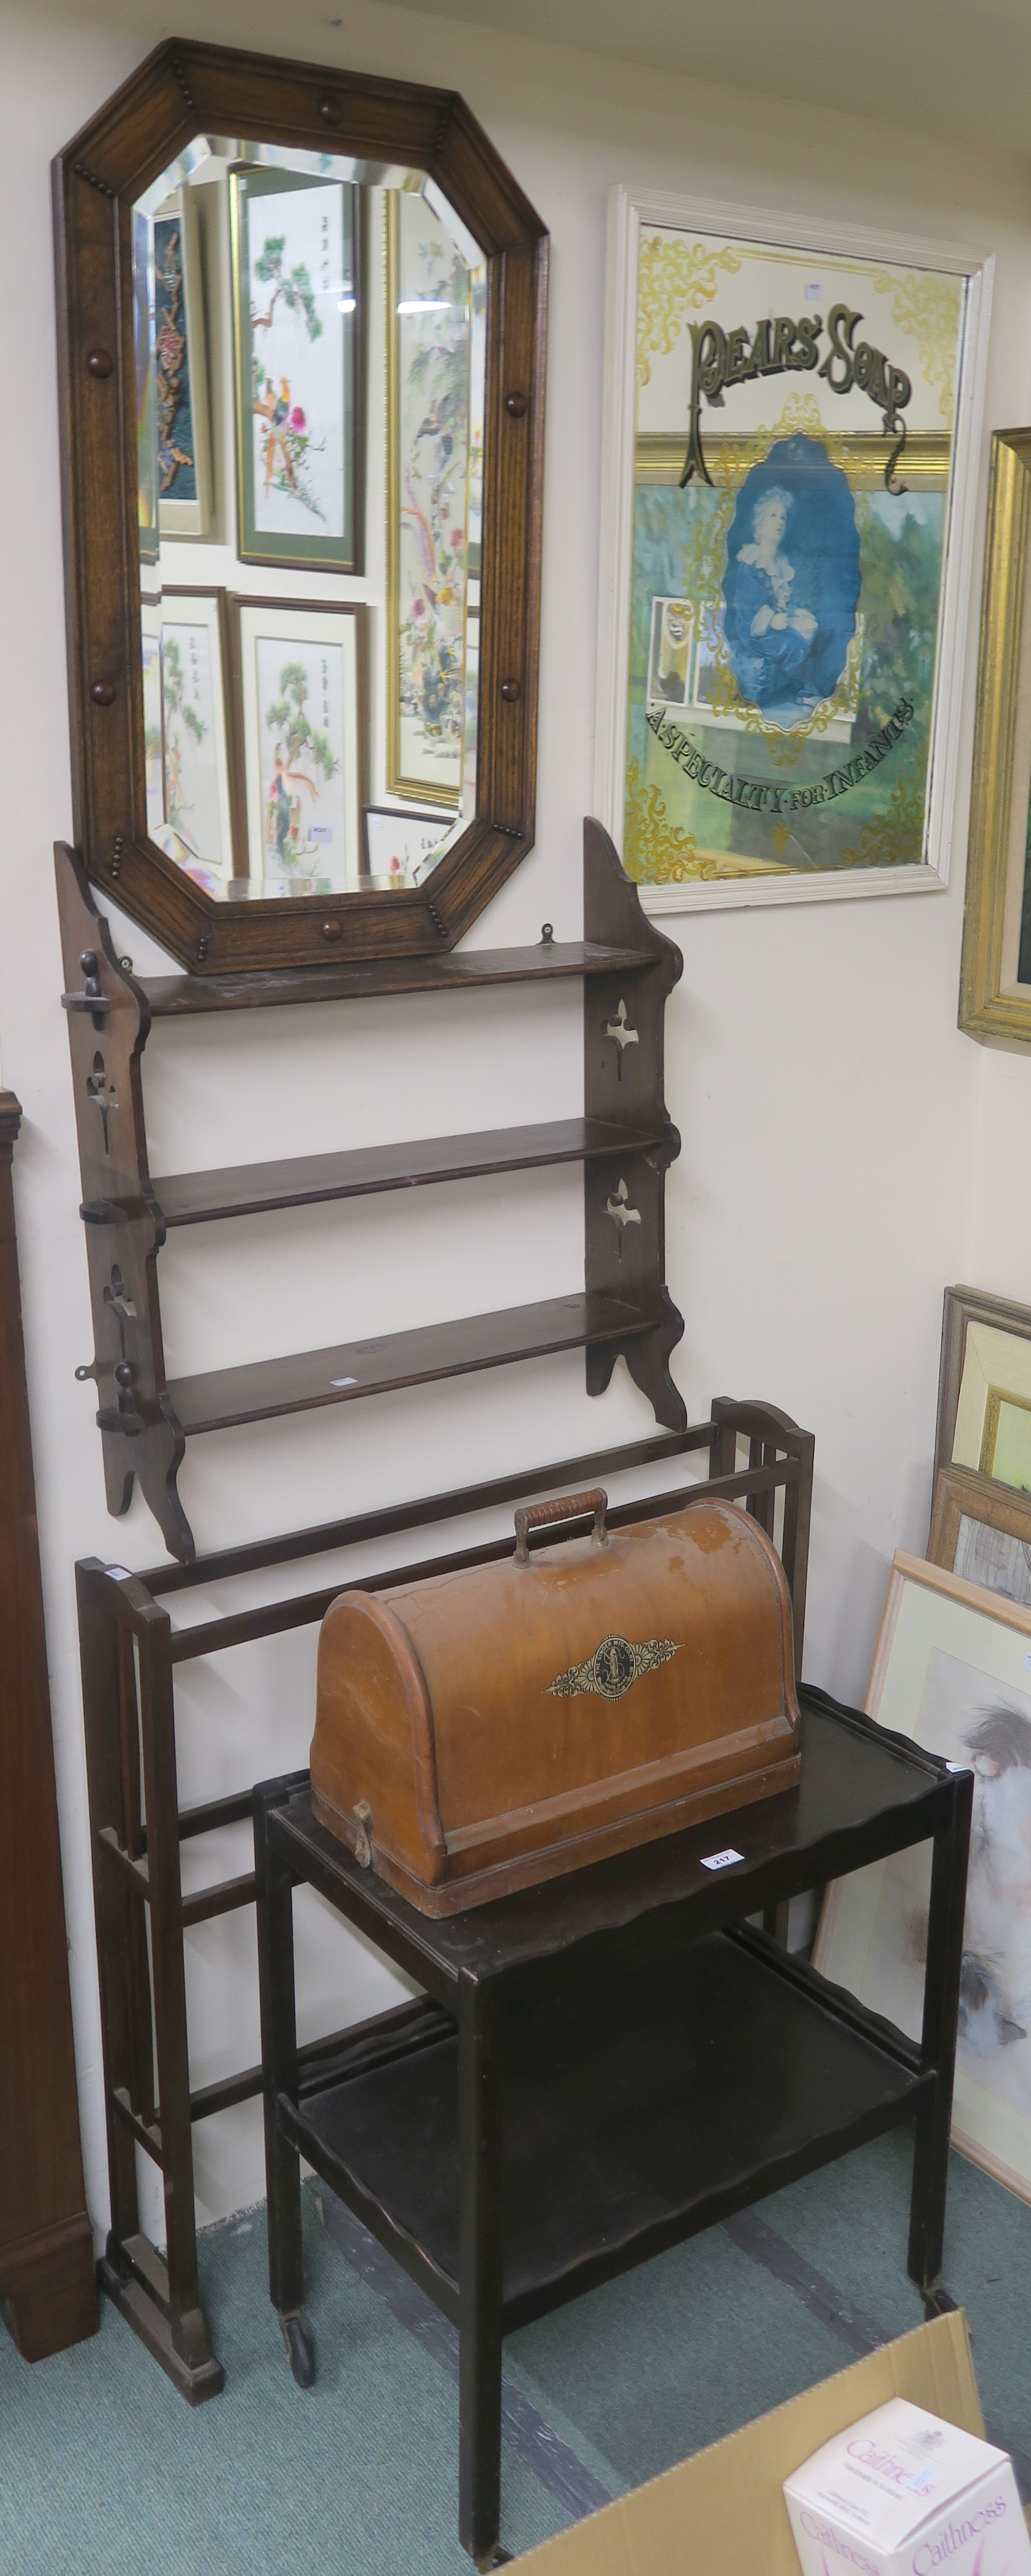 An oak mirror, Pears Soap mirror, Singer sewing machine, trolley, airer and shelves (6) Condition